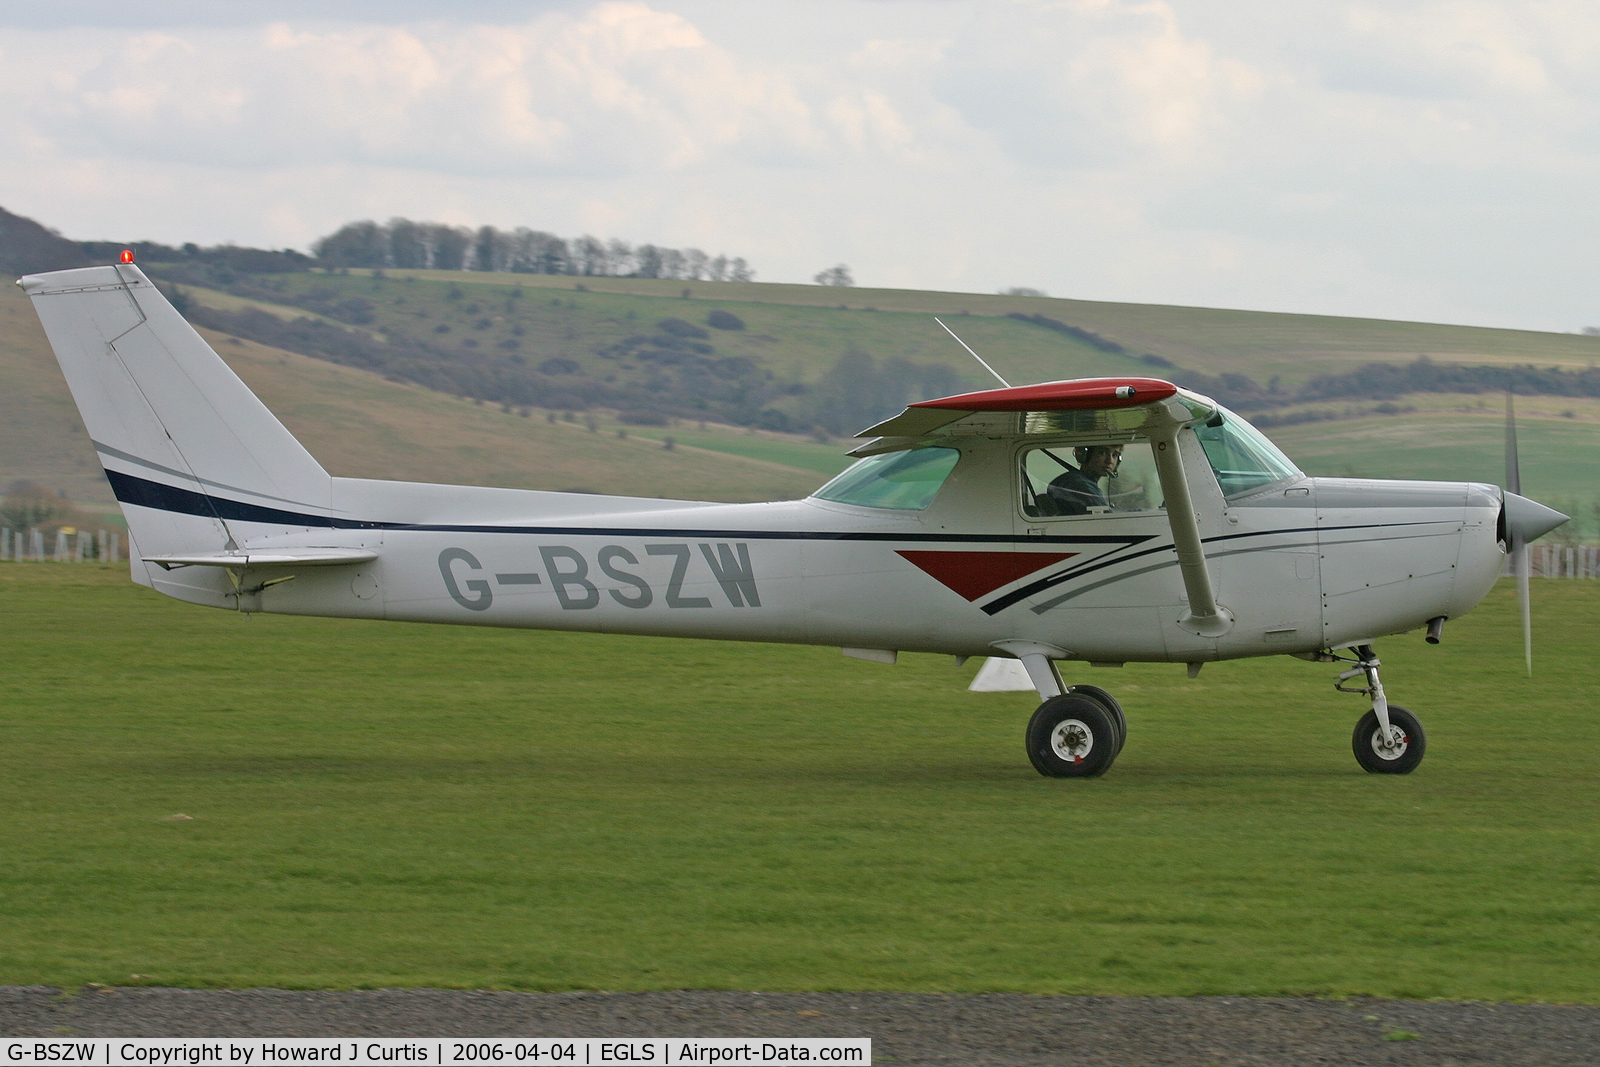 G-BSZW, 1977 Cessna 152 C/N 152-81072, Privately owned.